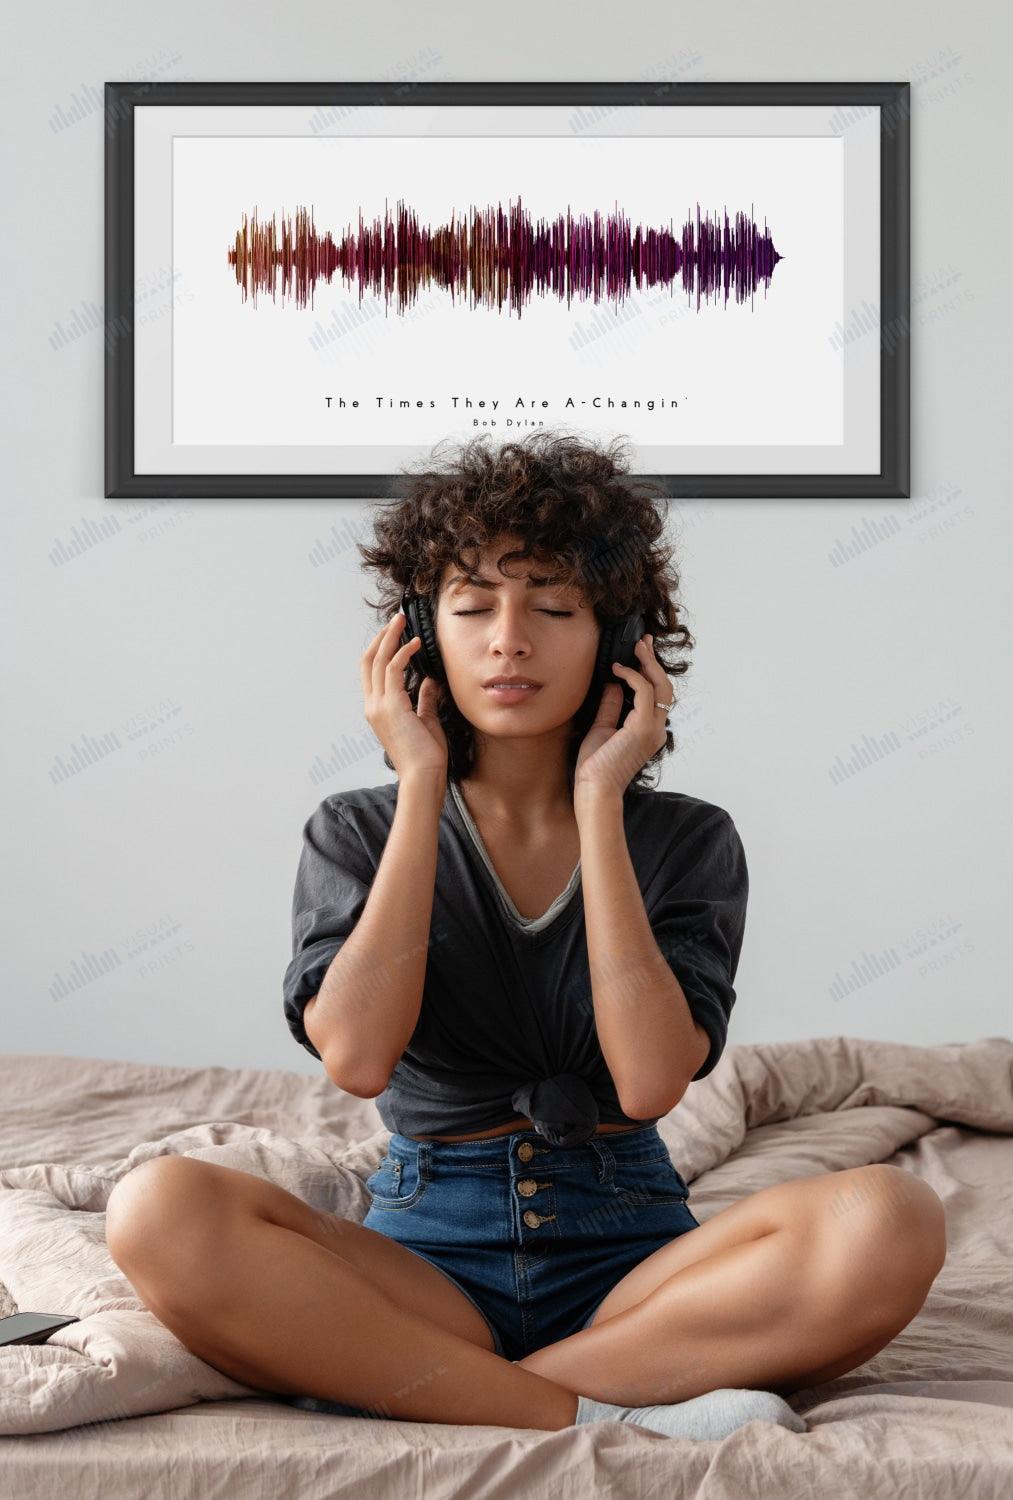 The Times They Are A-Changin' by Bob Dylan - Visual Wave Prints